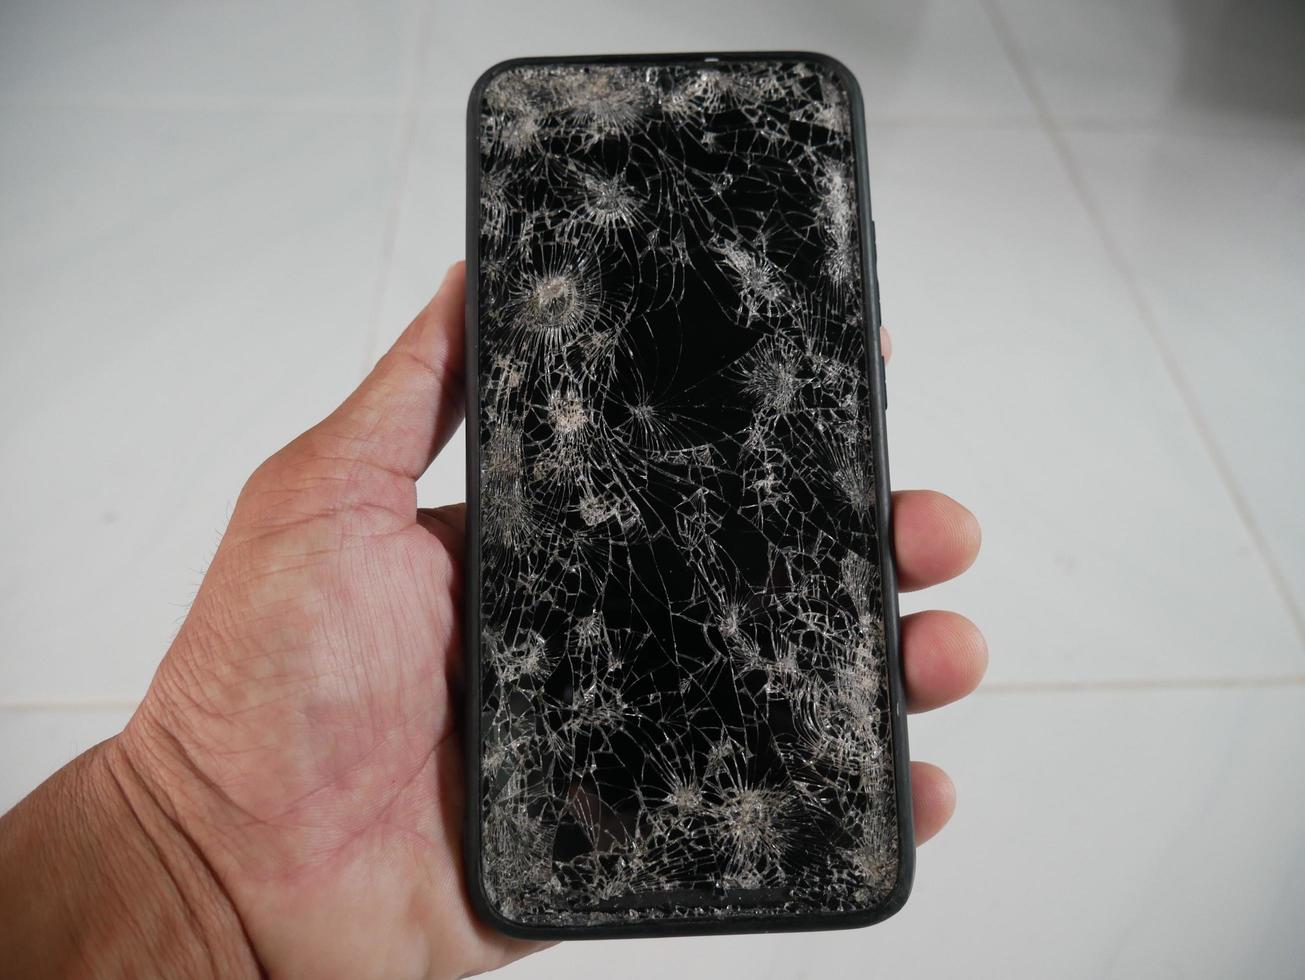 The smartphone hit the floor, it fell into a crack. photo